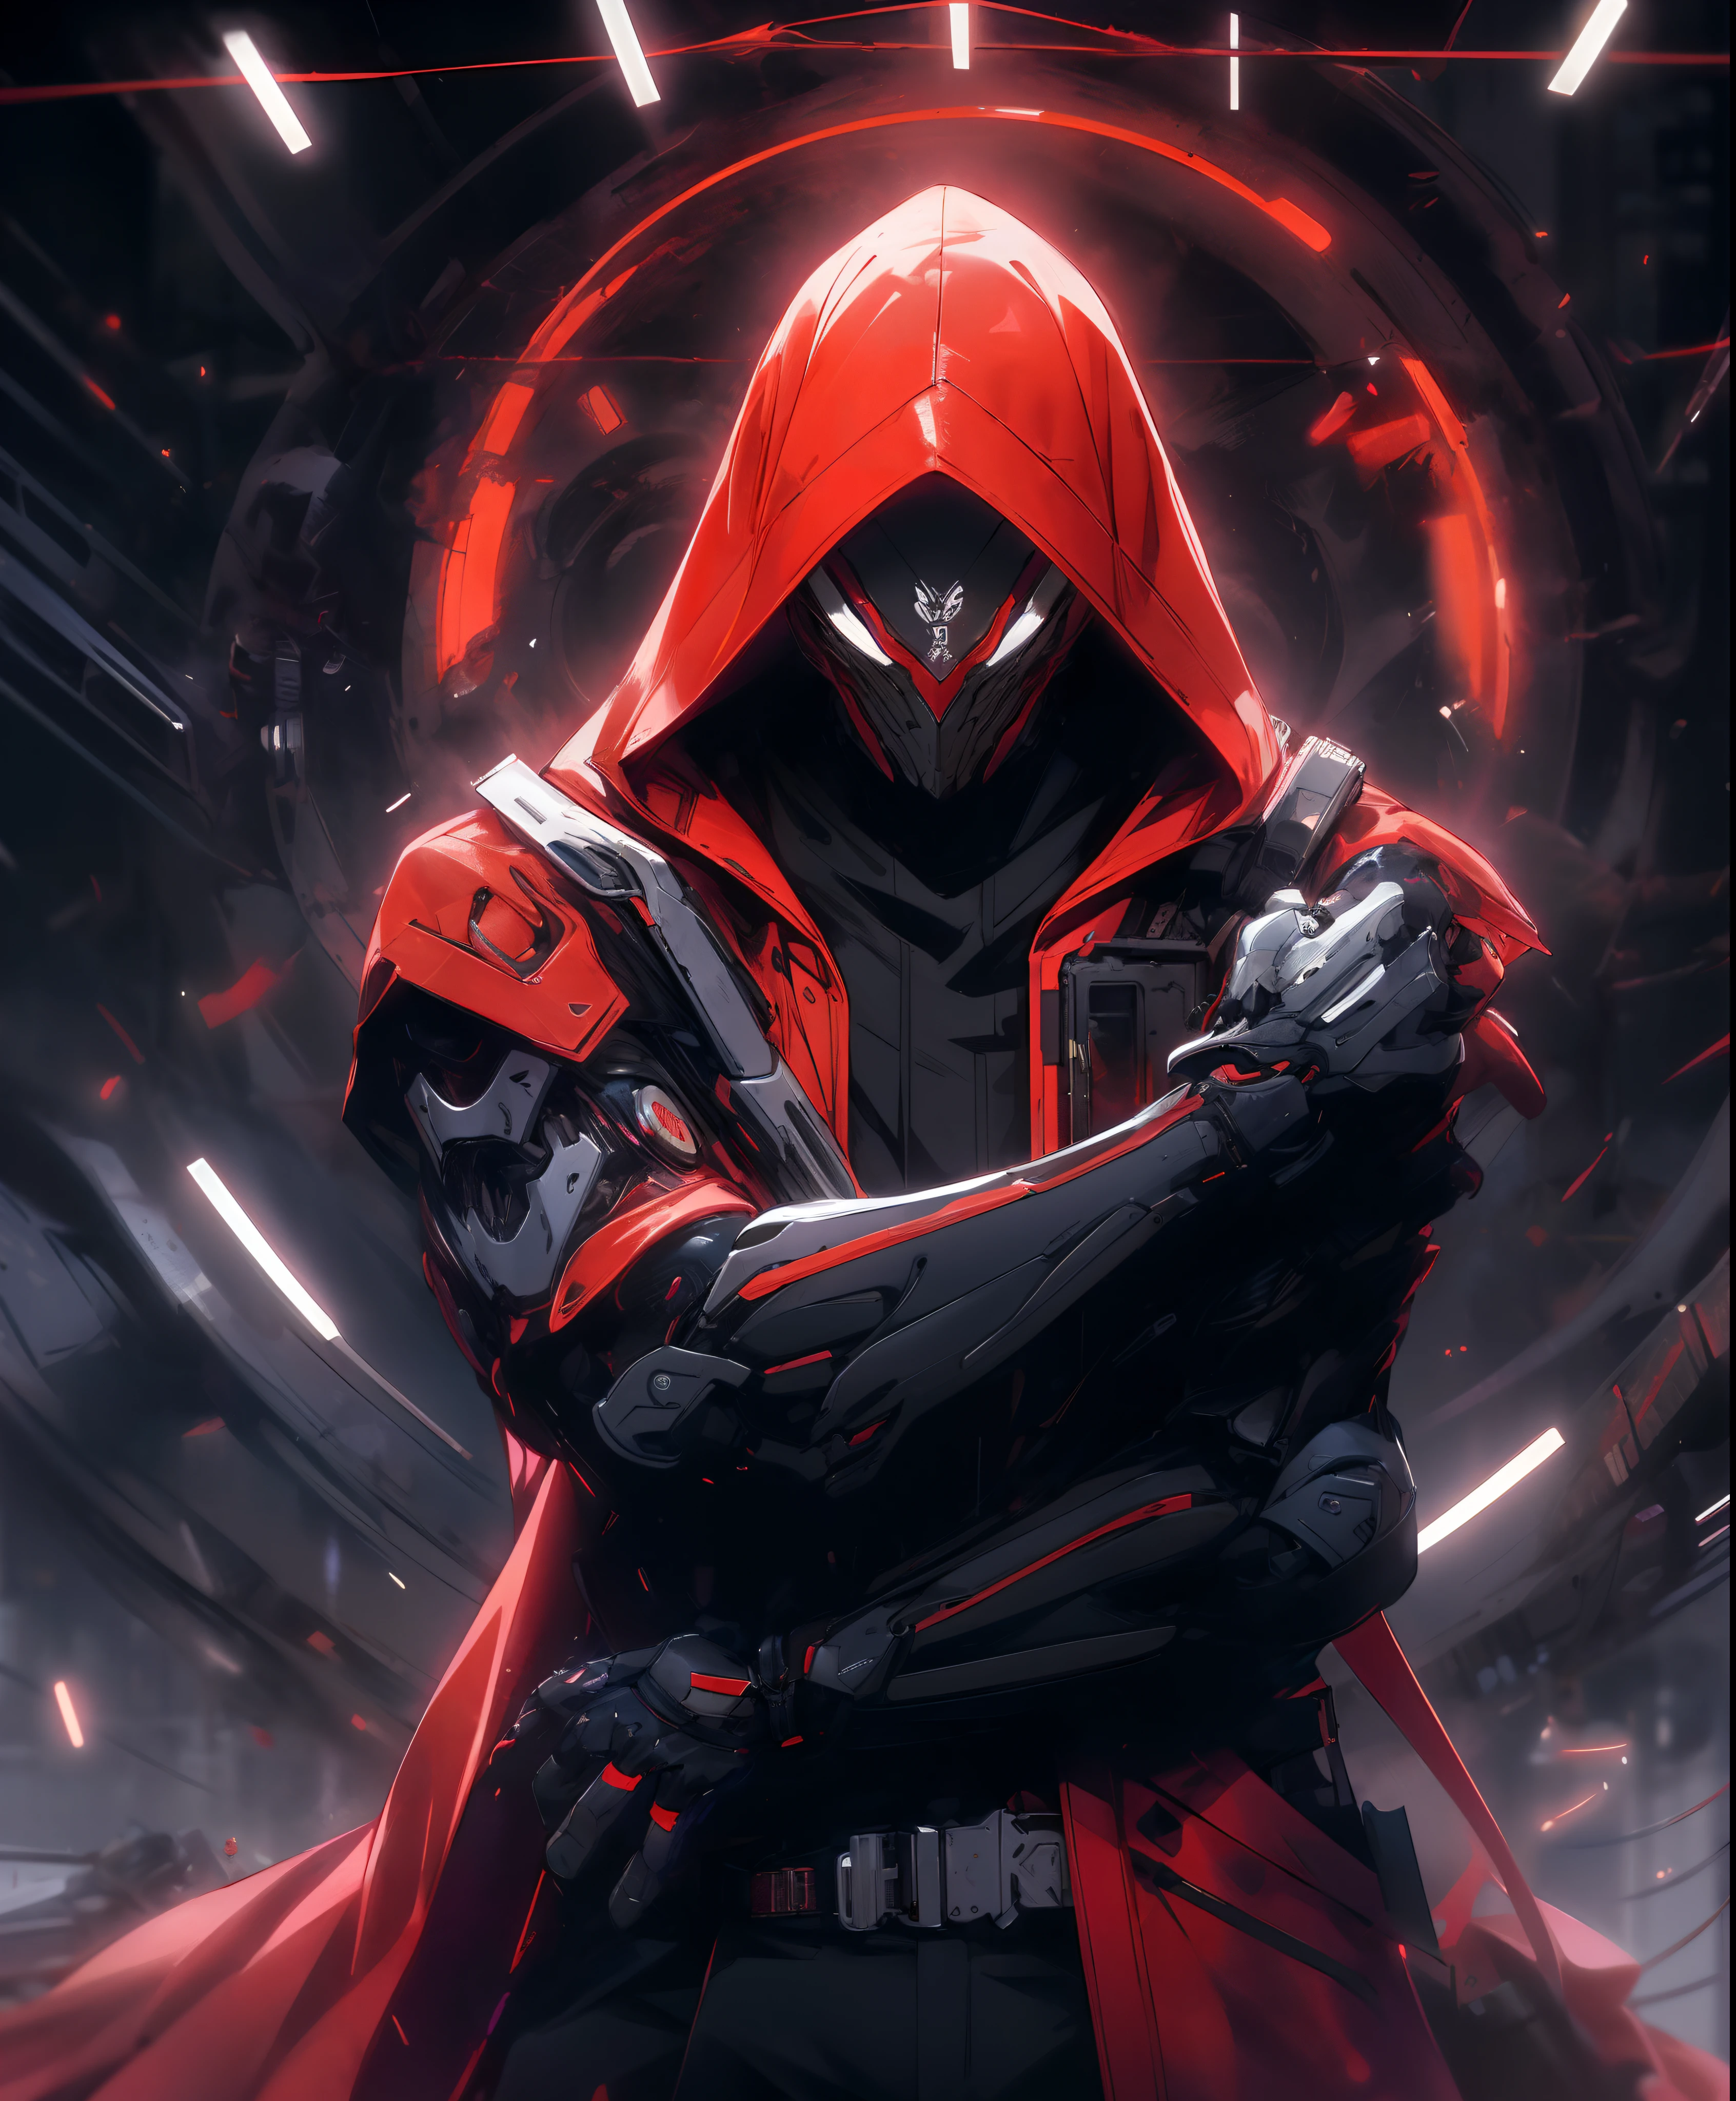 a man in a red jacket and black pants standing in a dark room, wearing cultist red robe, crimson attire, character from mortal kombat, as a character in tekken, fighting game character, cyberpunk assassin, red hooded mage, cyberpunk outfits, crimson clothes, the red ninja, wearing leather assassin armor, an edgy teen assassin, cool red jacket, cyberpunk street goon